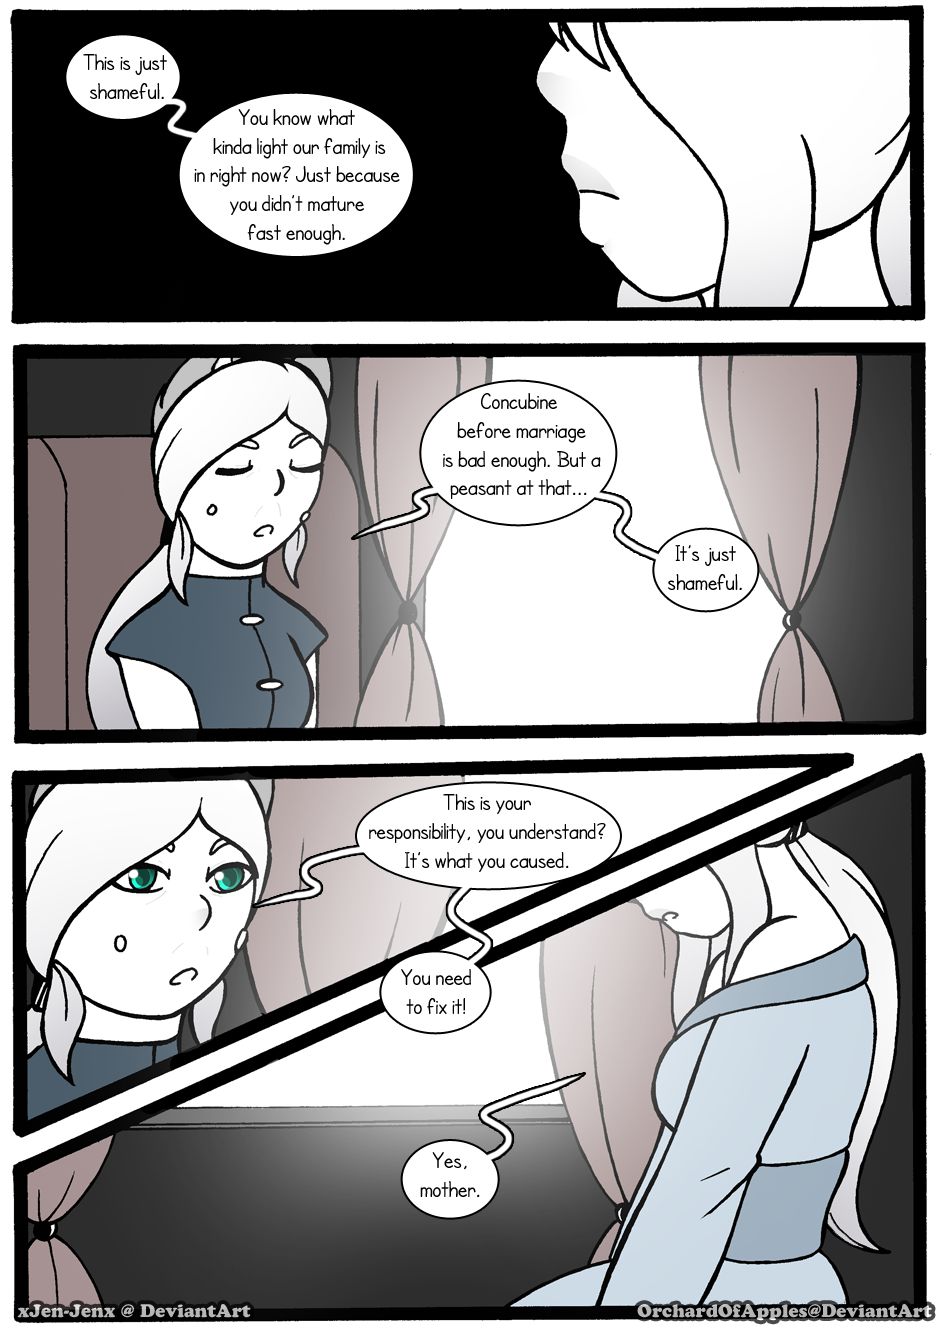 [Jeny-jen94] Between Kings and Queens [Ongoing] 187